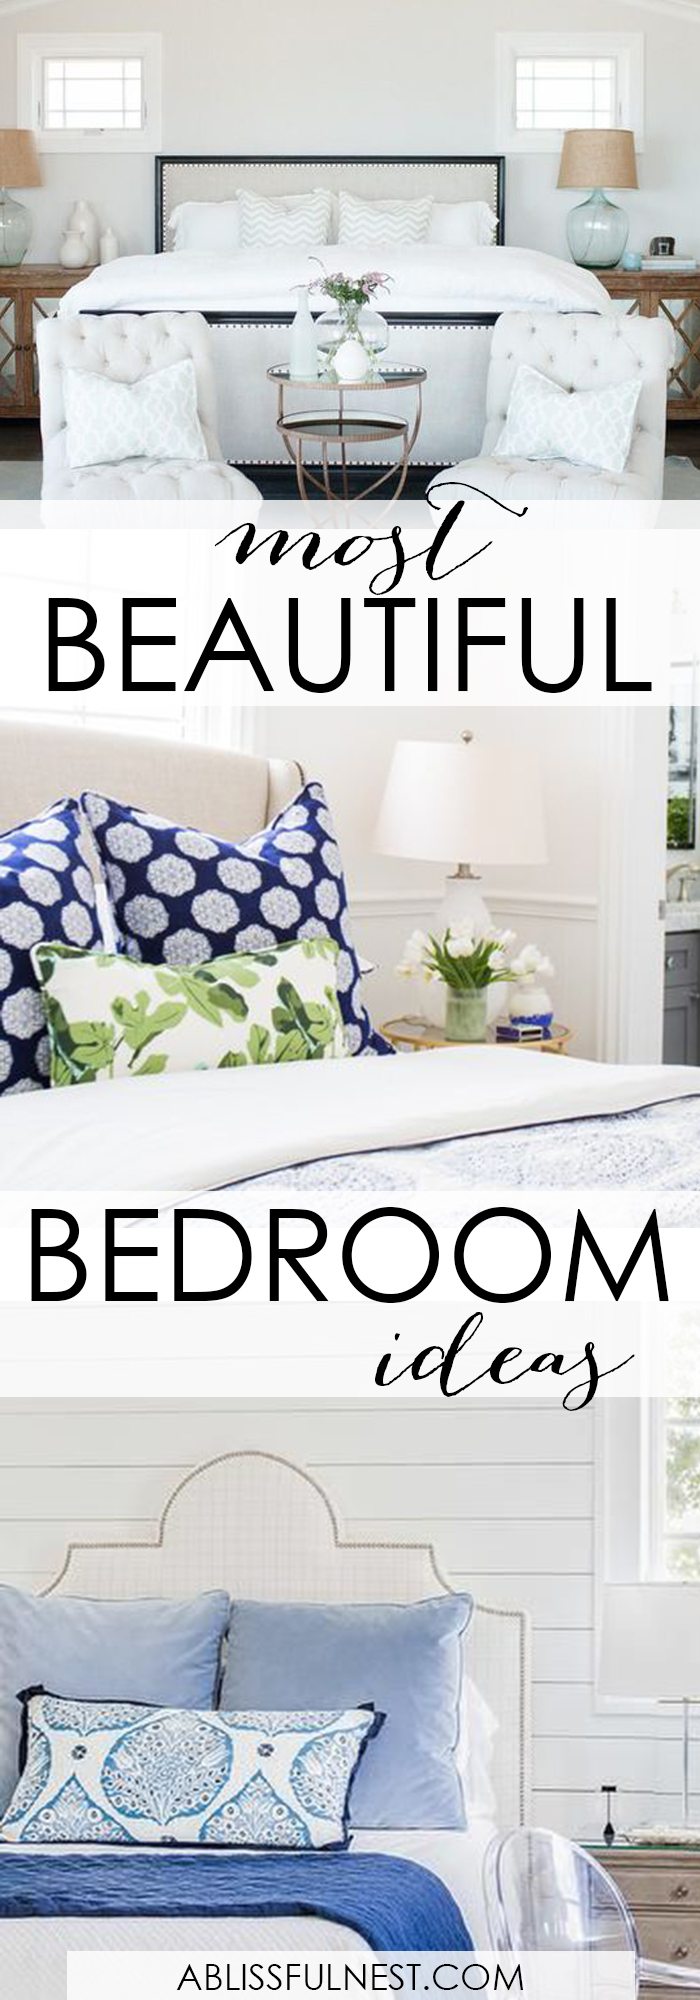 These are the most gorgeous bedrooms I’ve ever seen! So many great ideas for decorating your bedroom. https://ablissfulnest.com/ #masterbedroom #bedroomideas #masterbedroomideas